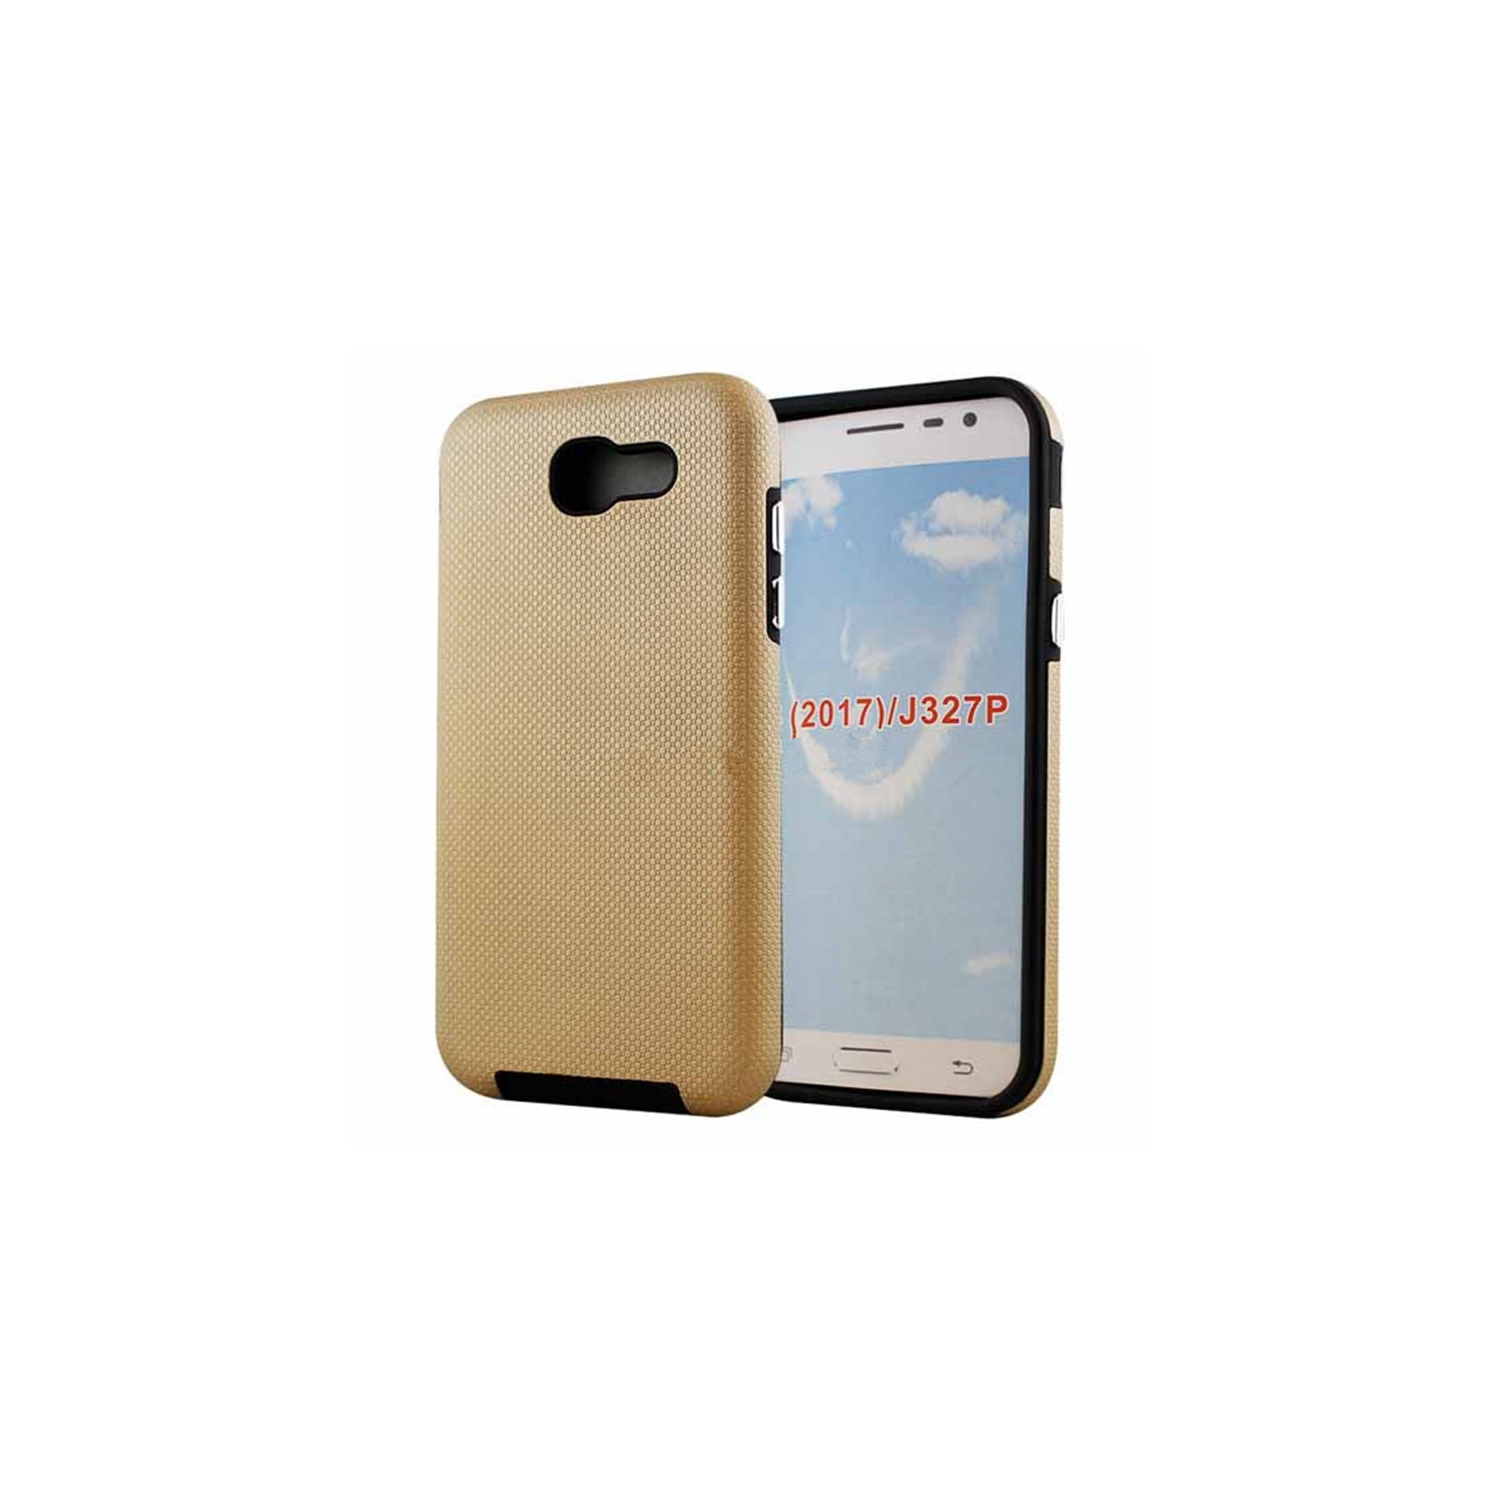 【CSmart】 Slim Fitted Hybrid Hard PC Shell Shockproof Scratch Resistant Case Cover for Samsung Galaxy J3 Prime 2017, Gold